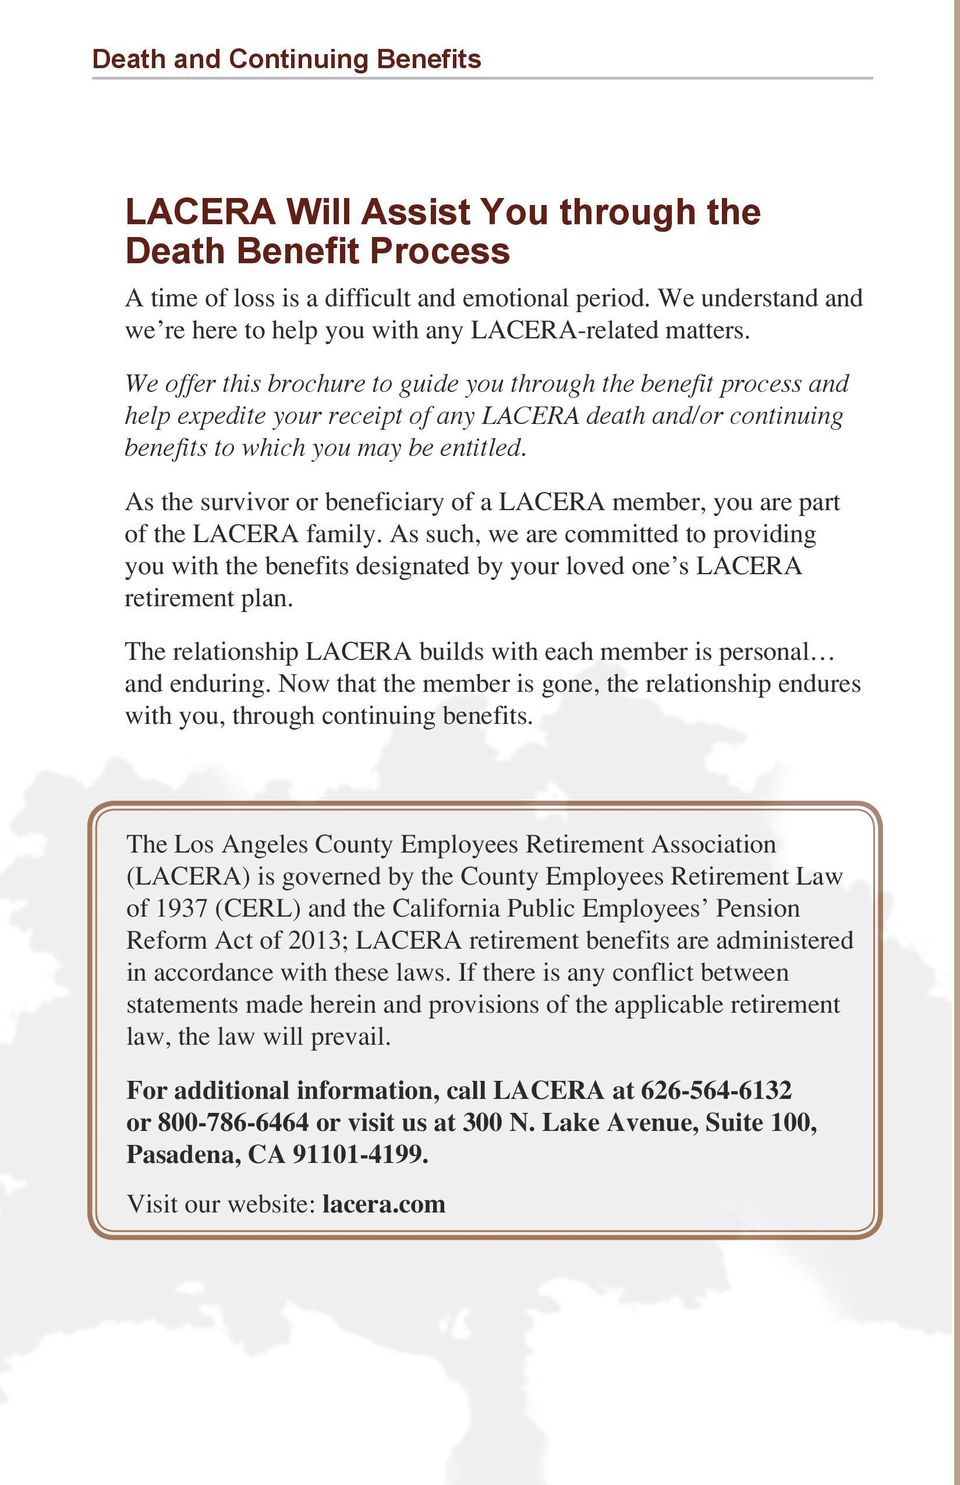 We offer this brochure to guide you through the benefit process and help expedite your receipt of any LACERA death and/or continuing benefits to which you may be entitled.